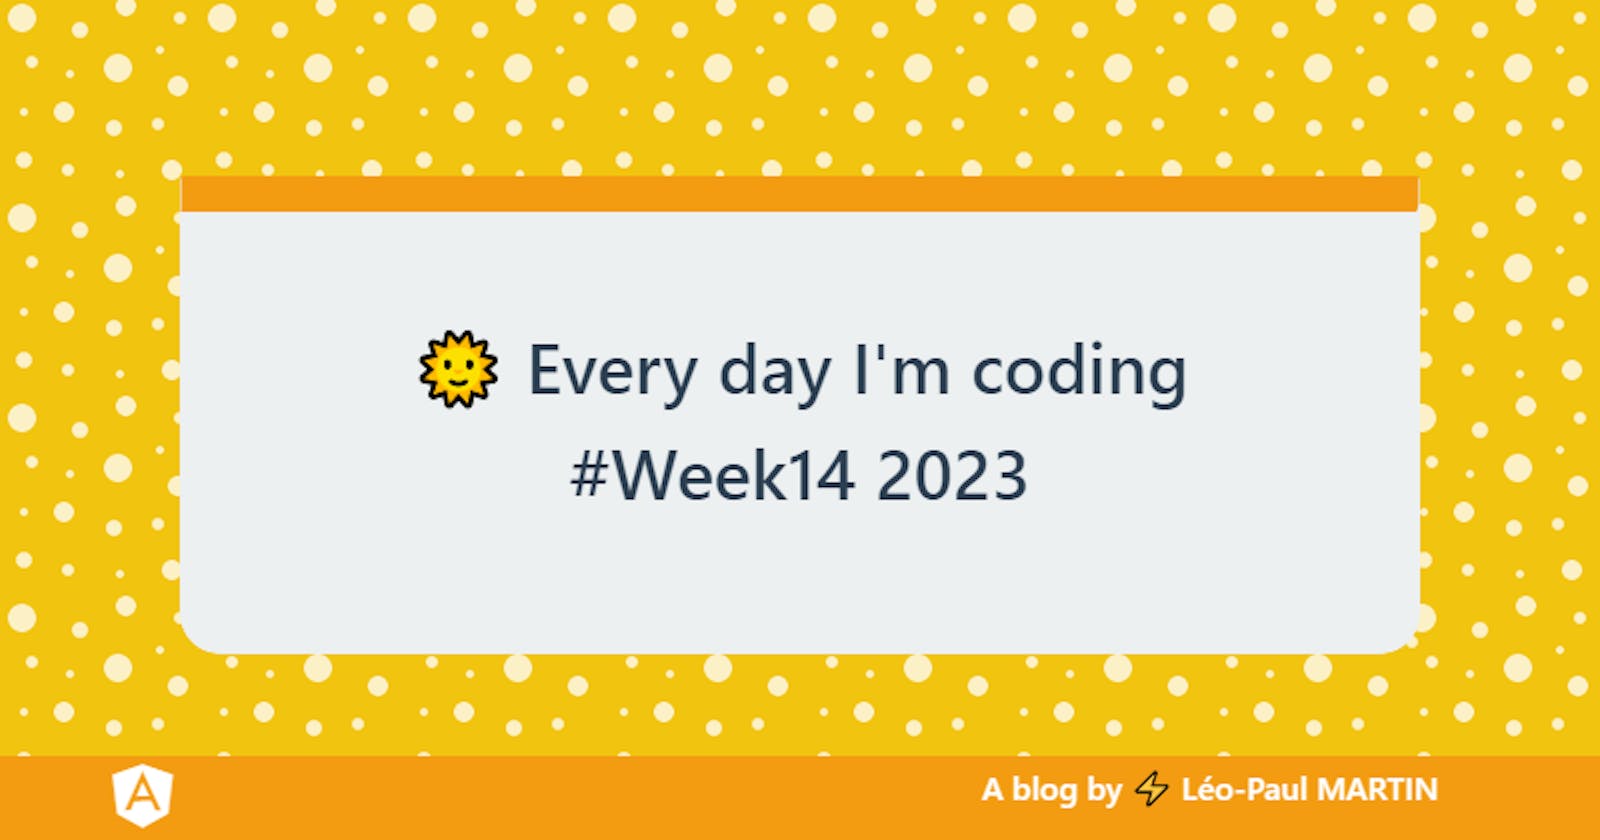 🌞 Every day I'm coding #Week14 2023